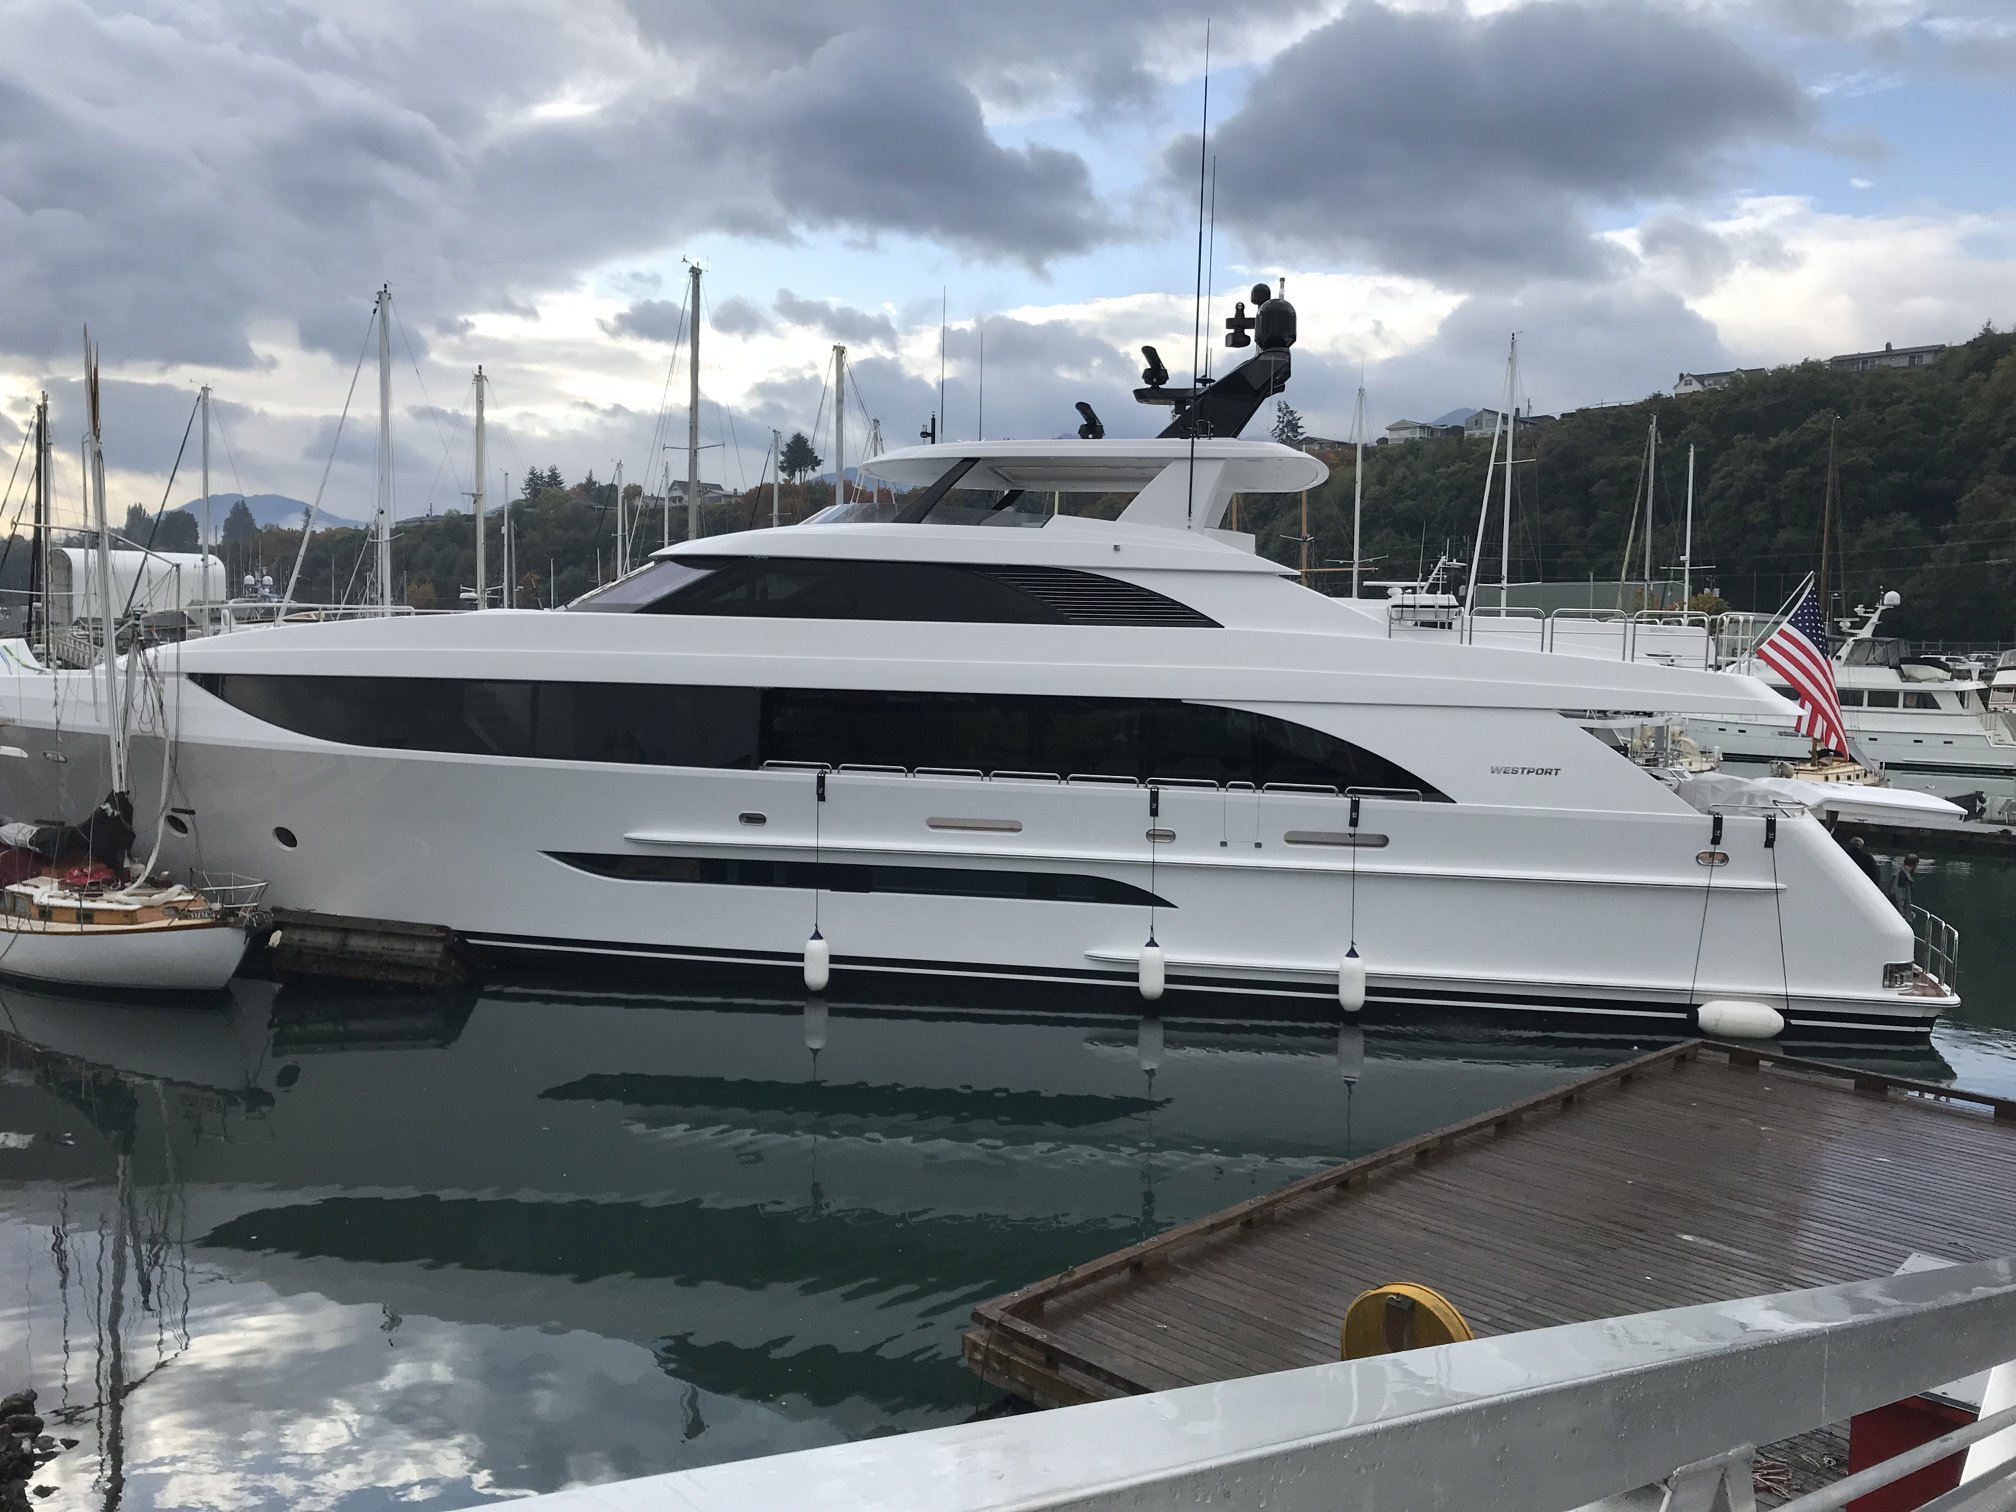 2019 super yacht crashes into dock